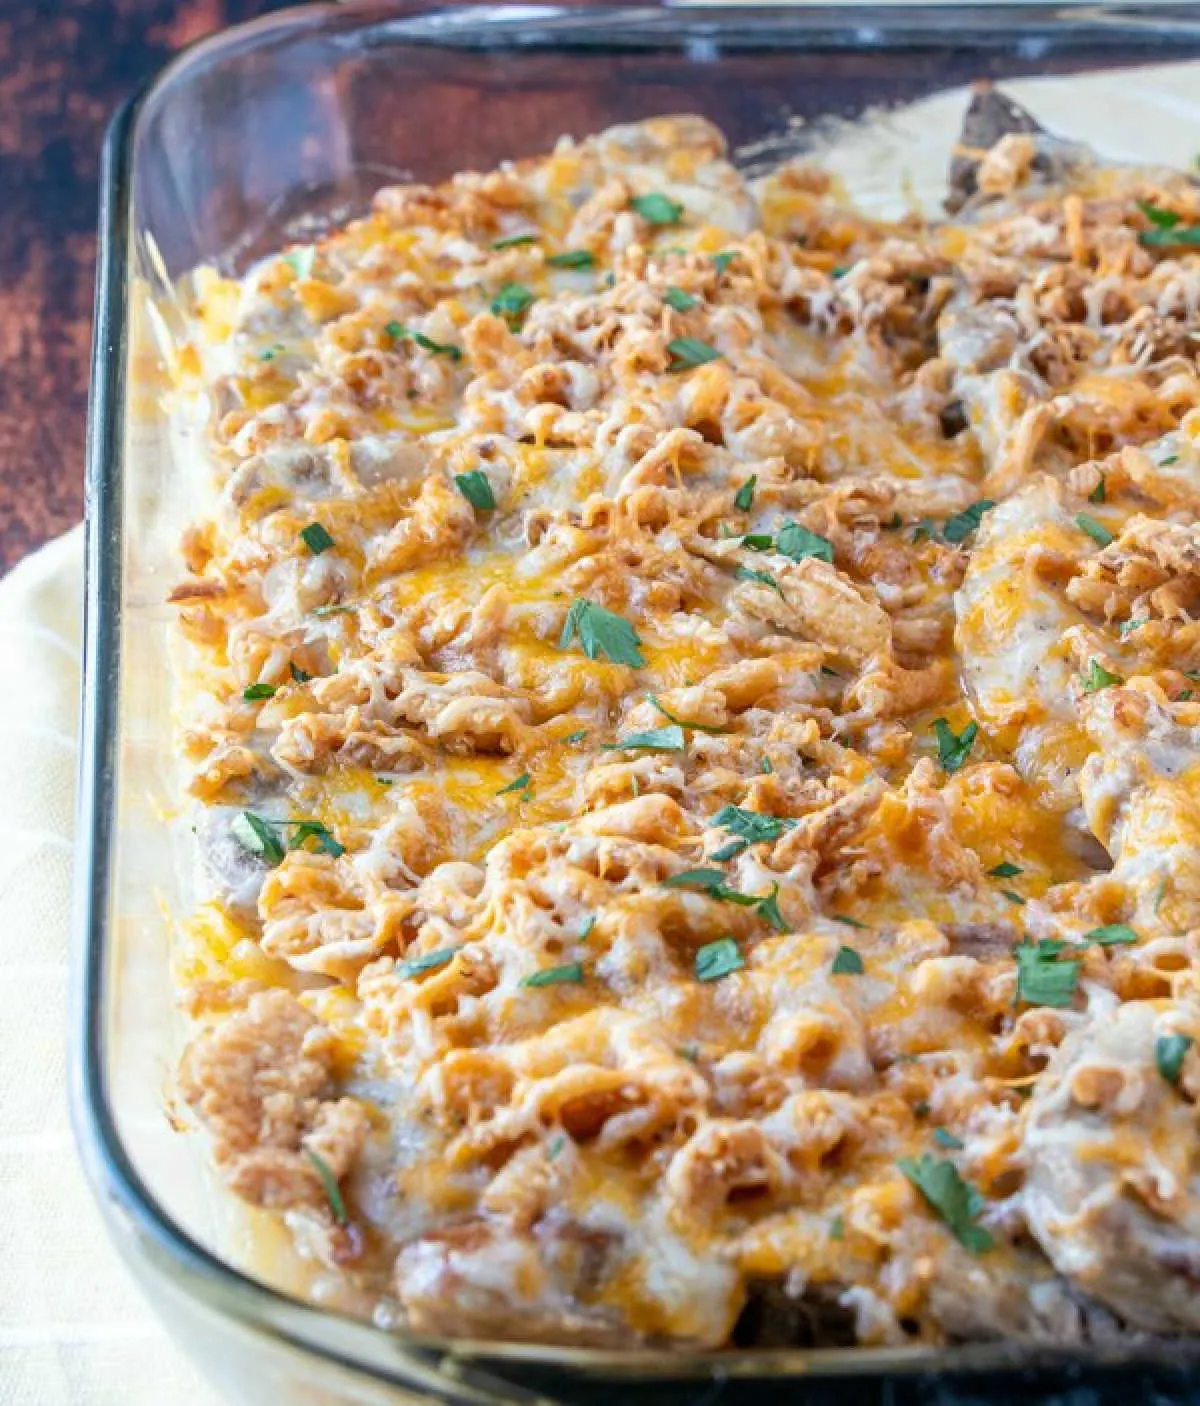 Casserole dish loaded with cheesy pork chop and potato bake topped with french fried onions and fresh herbs. 